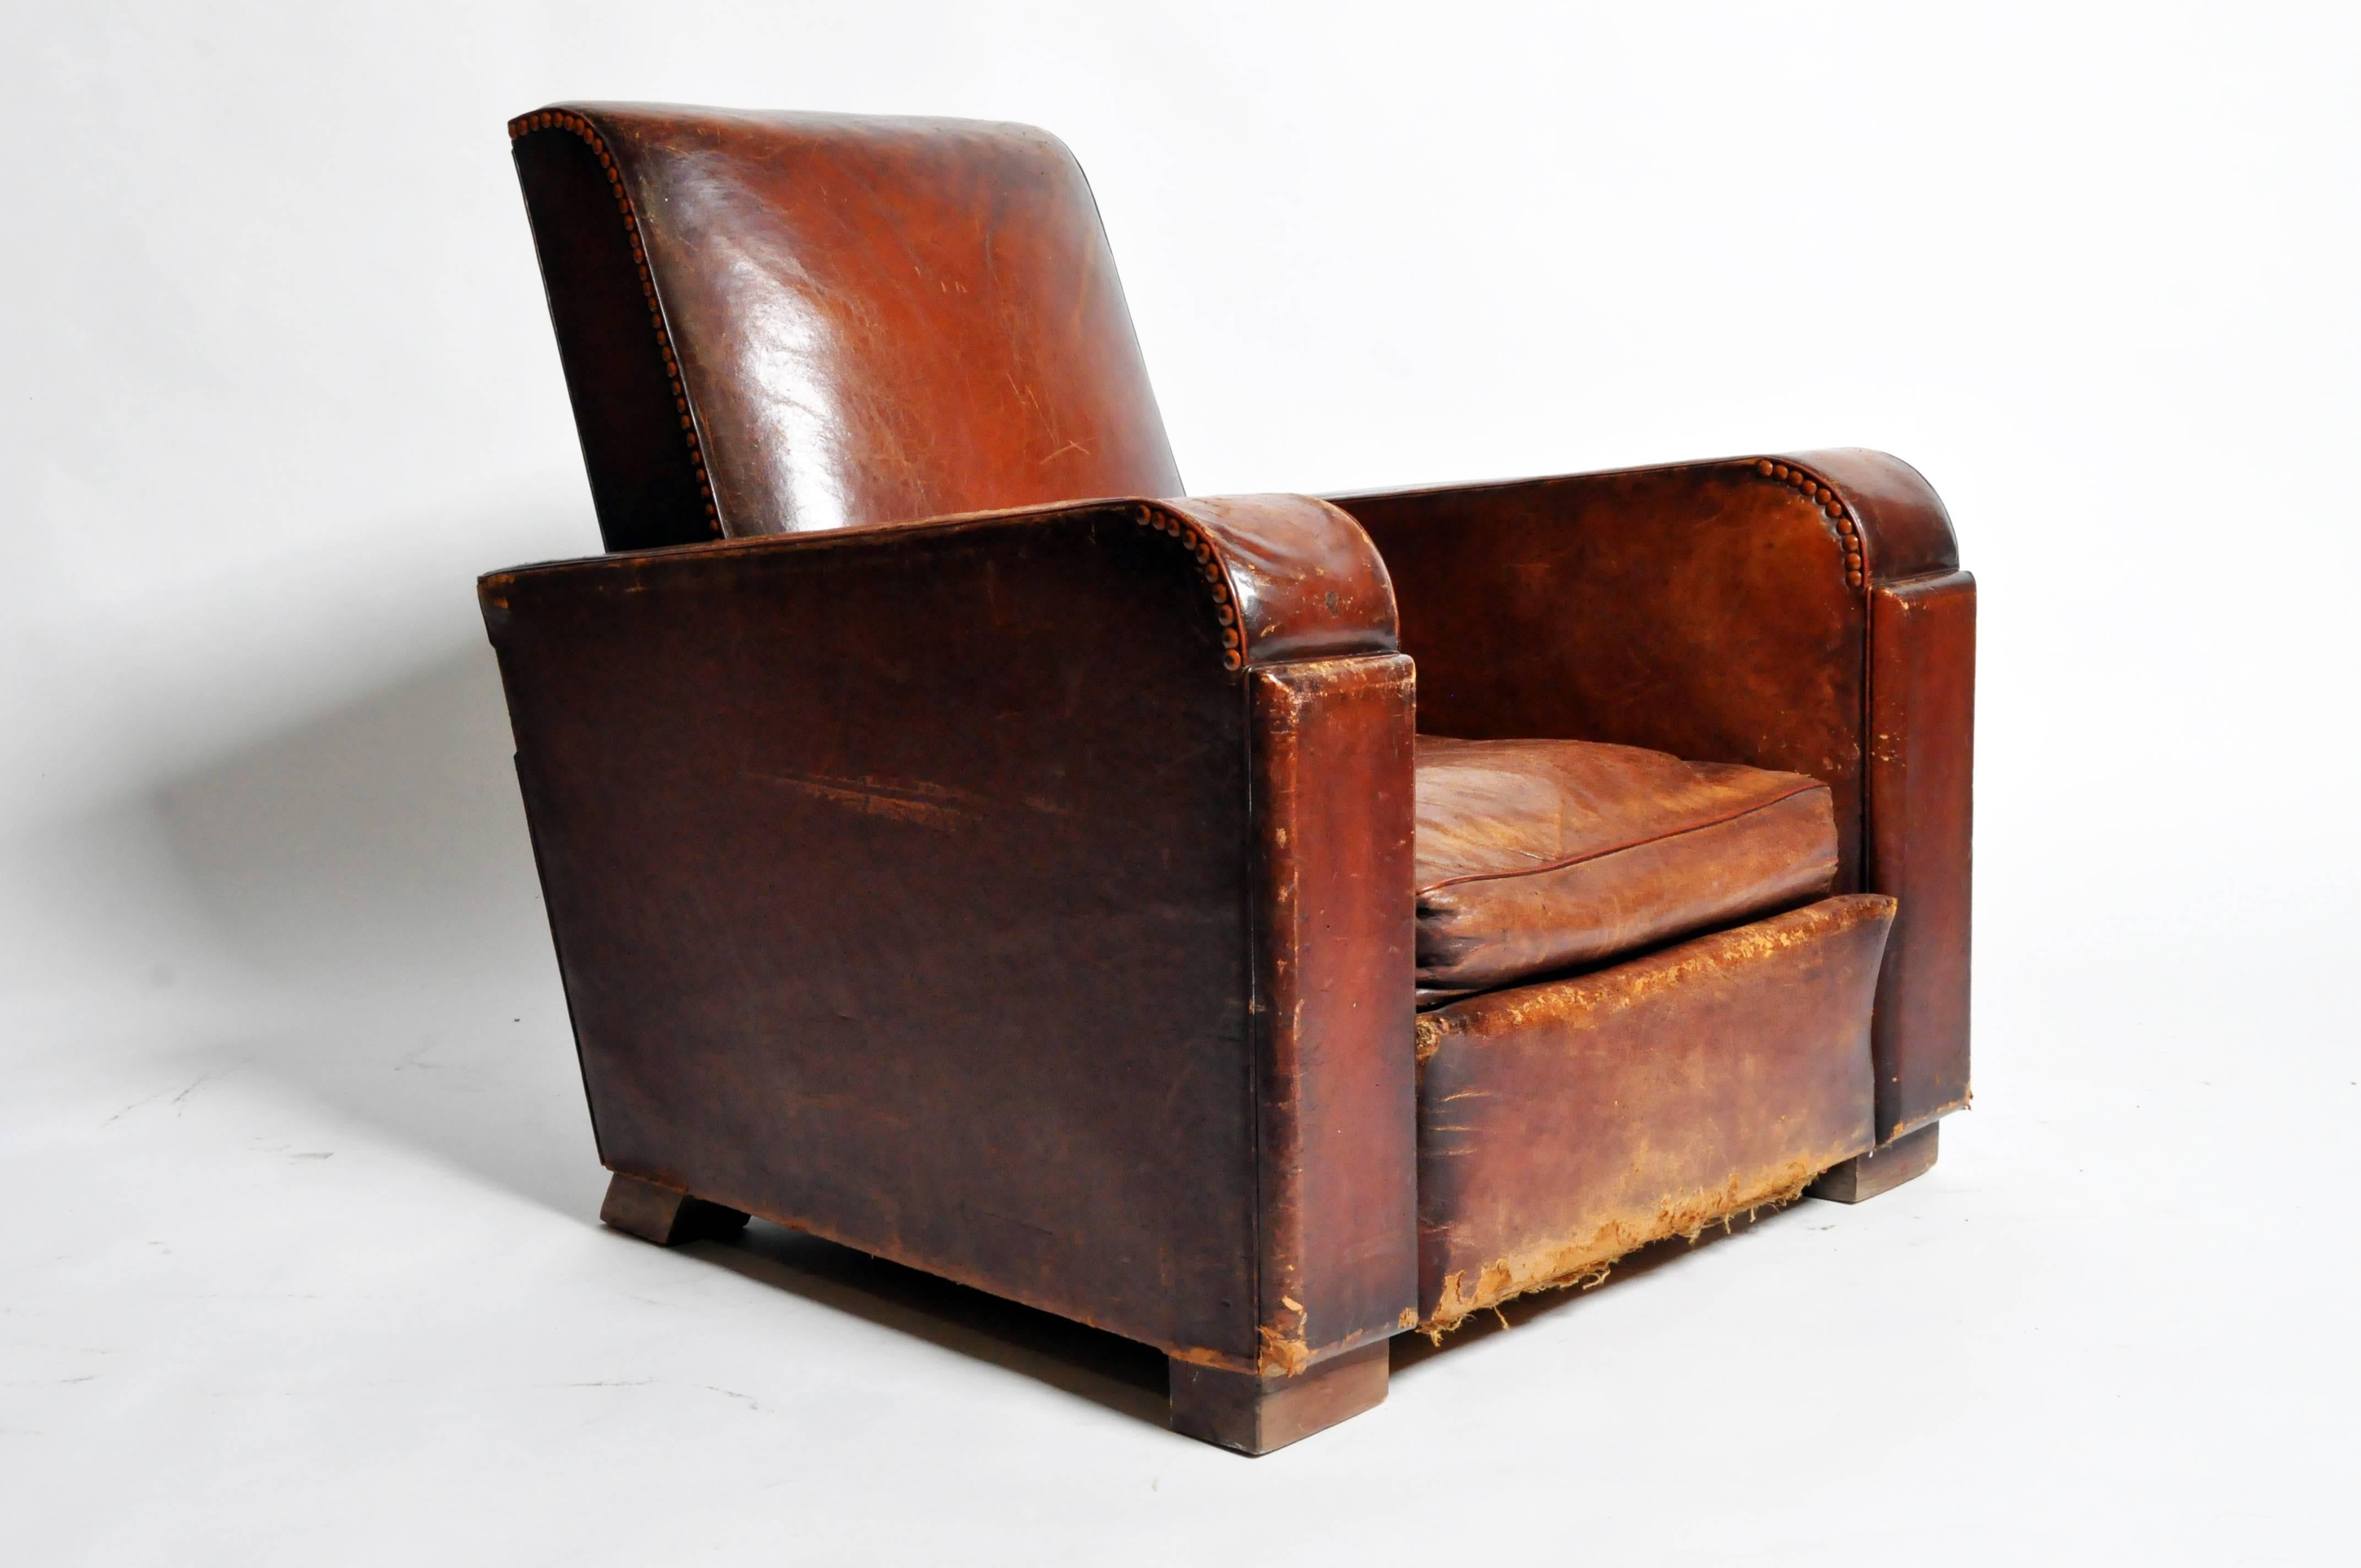 This handsome Art Deco leather chair is from Paris, France and was made from leather, c. 1940. The chair features its original leather and a beautifully aged patina. 

Additional dimensions: 20